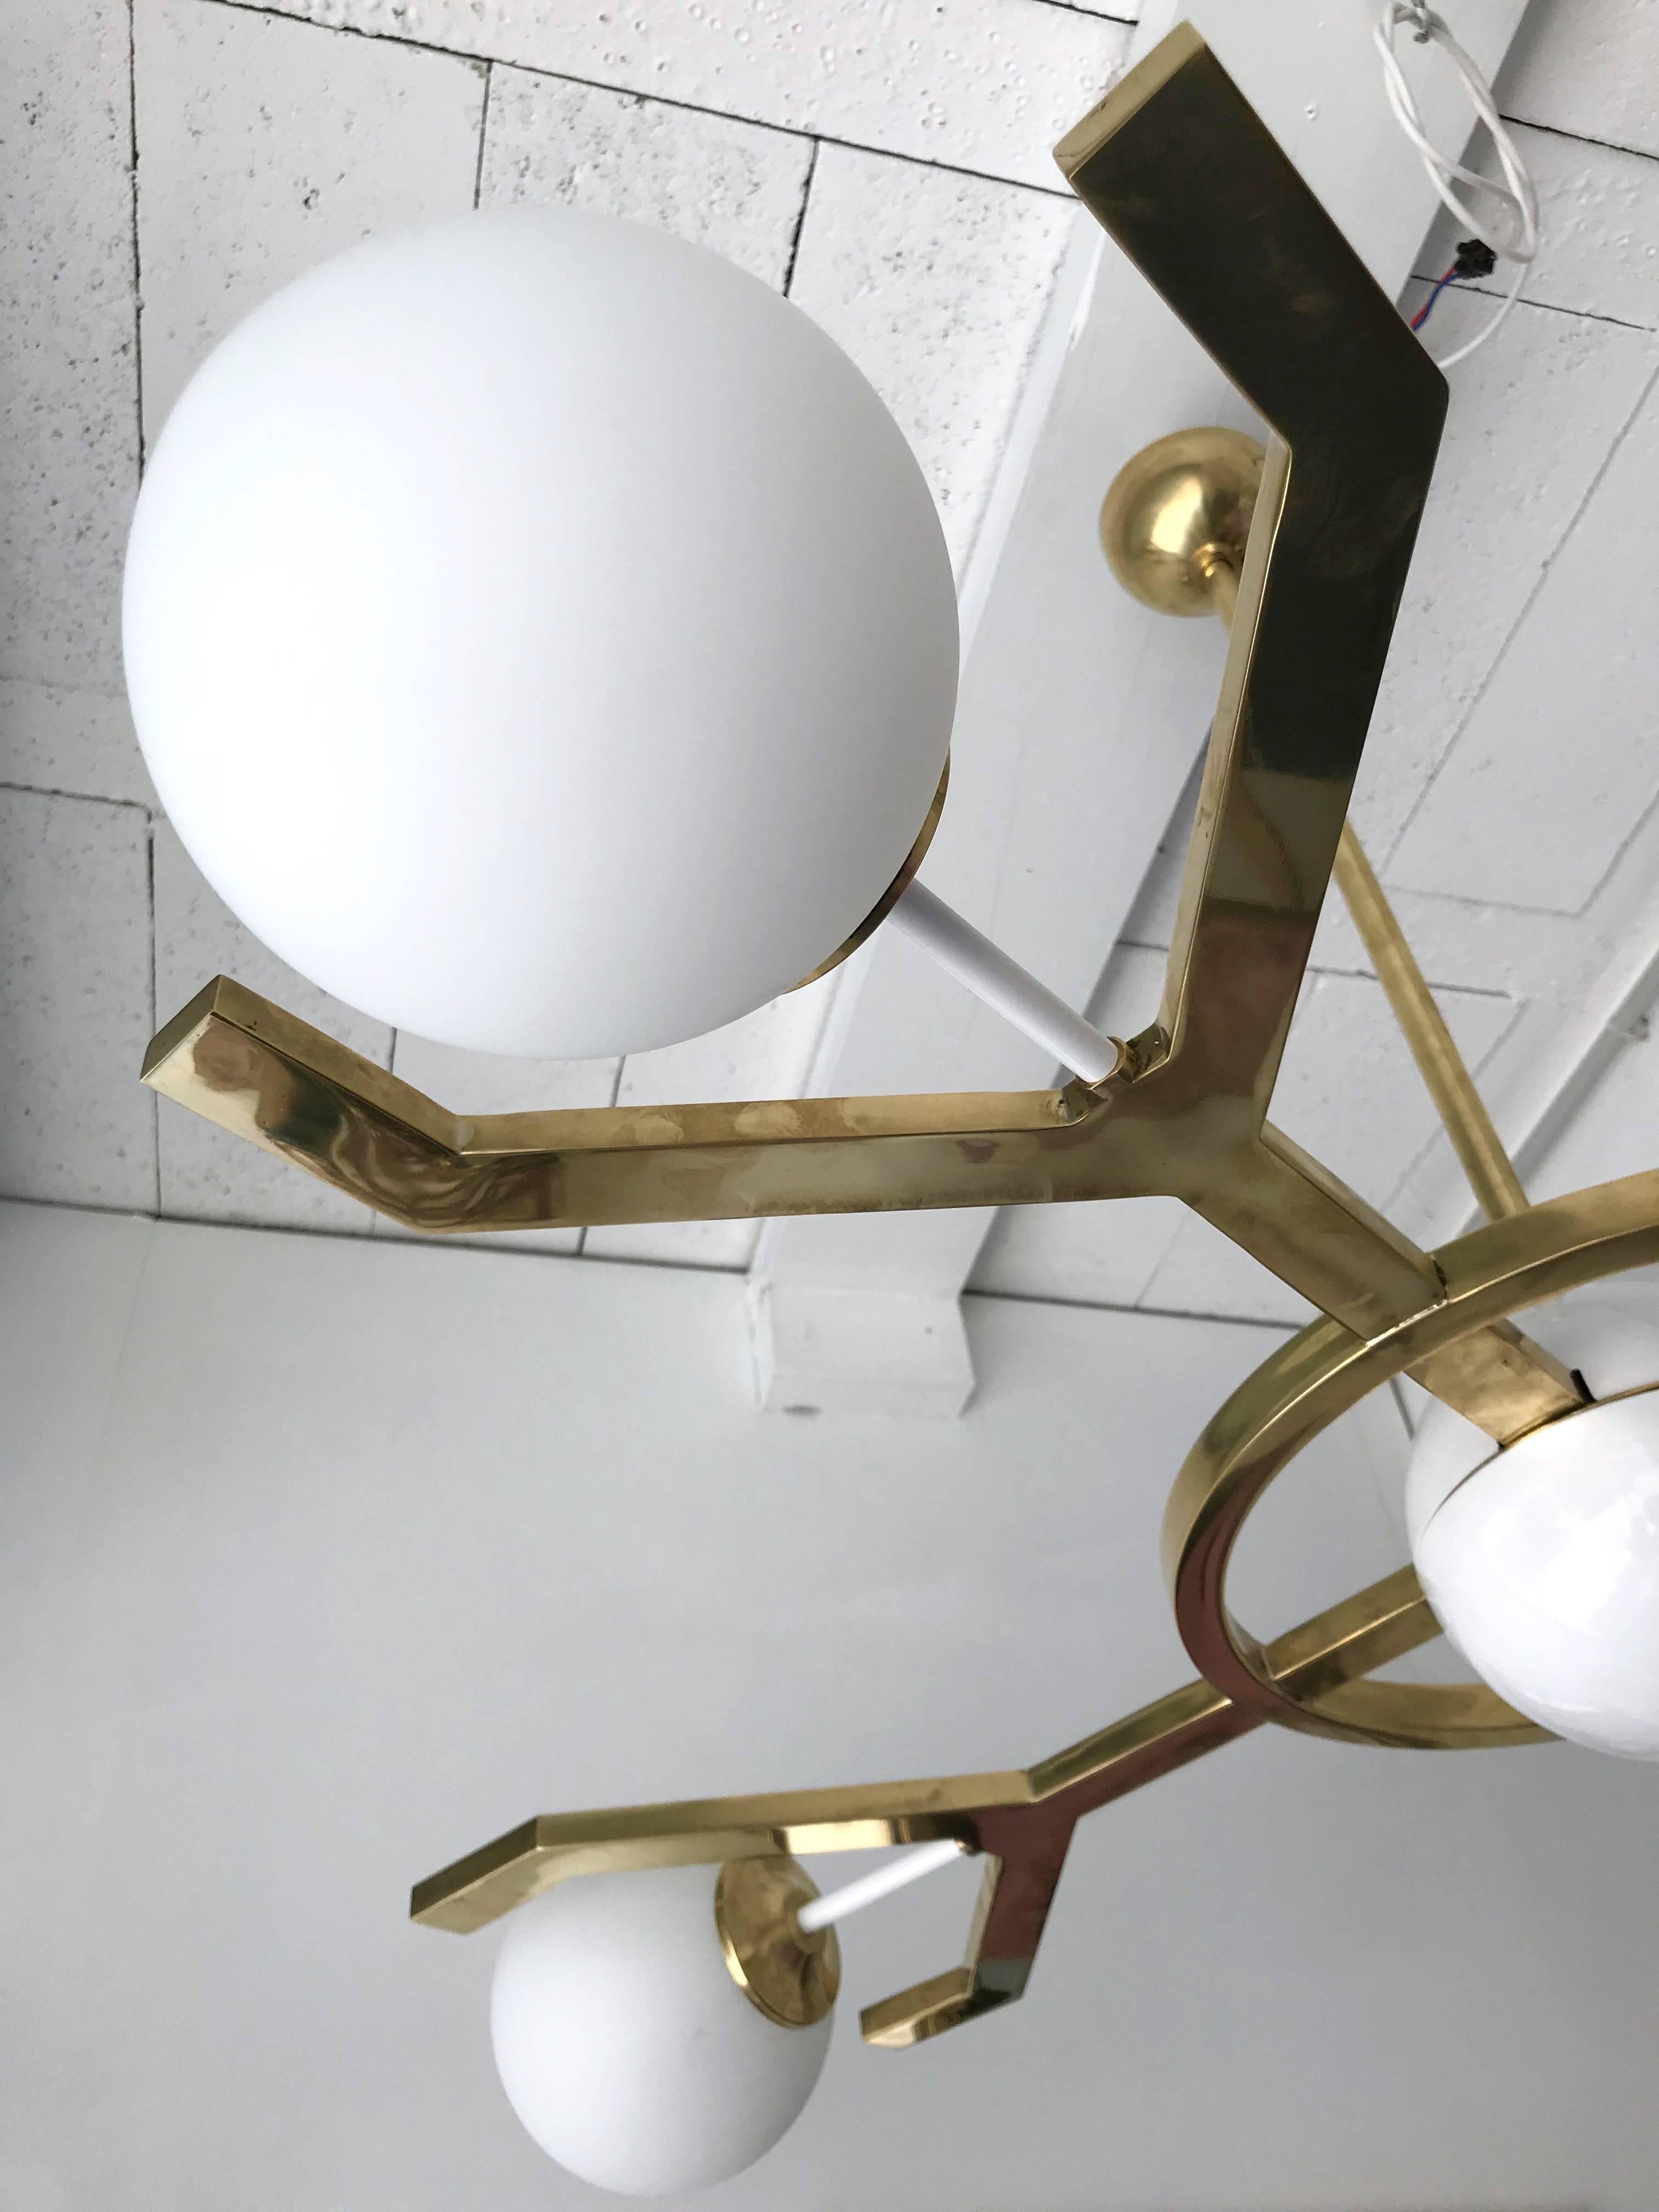 Contemporary chandelier or ceiling pendant light called Y model, full brass and opaline glass ball. Small artisanal production all made in Italy, great quality. Limited edition of 8 exemplary exclusively made for Stanislas Reboul gallery.